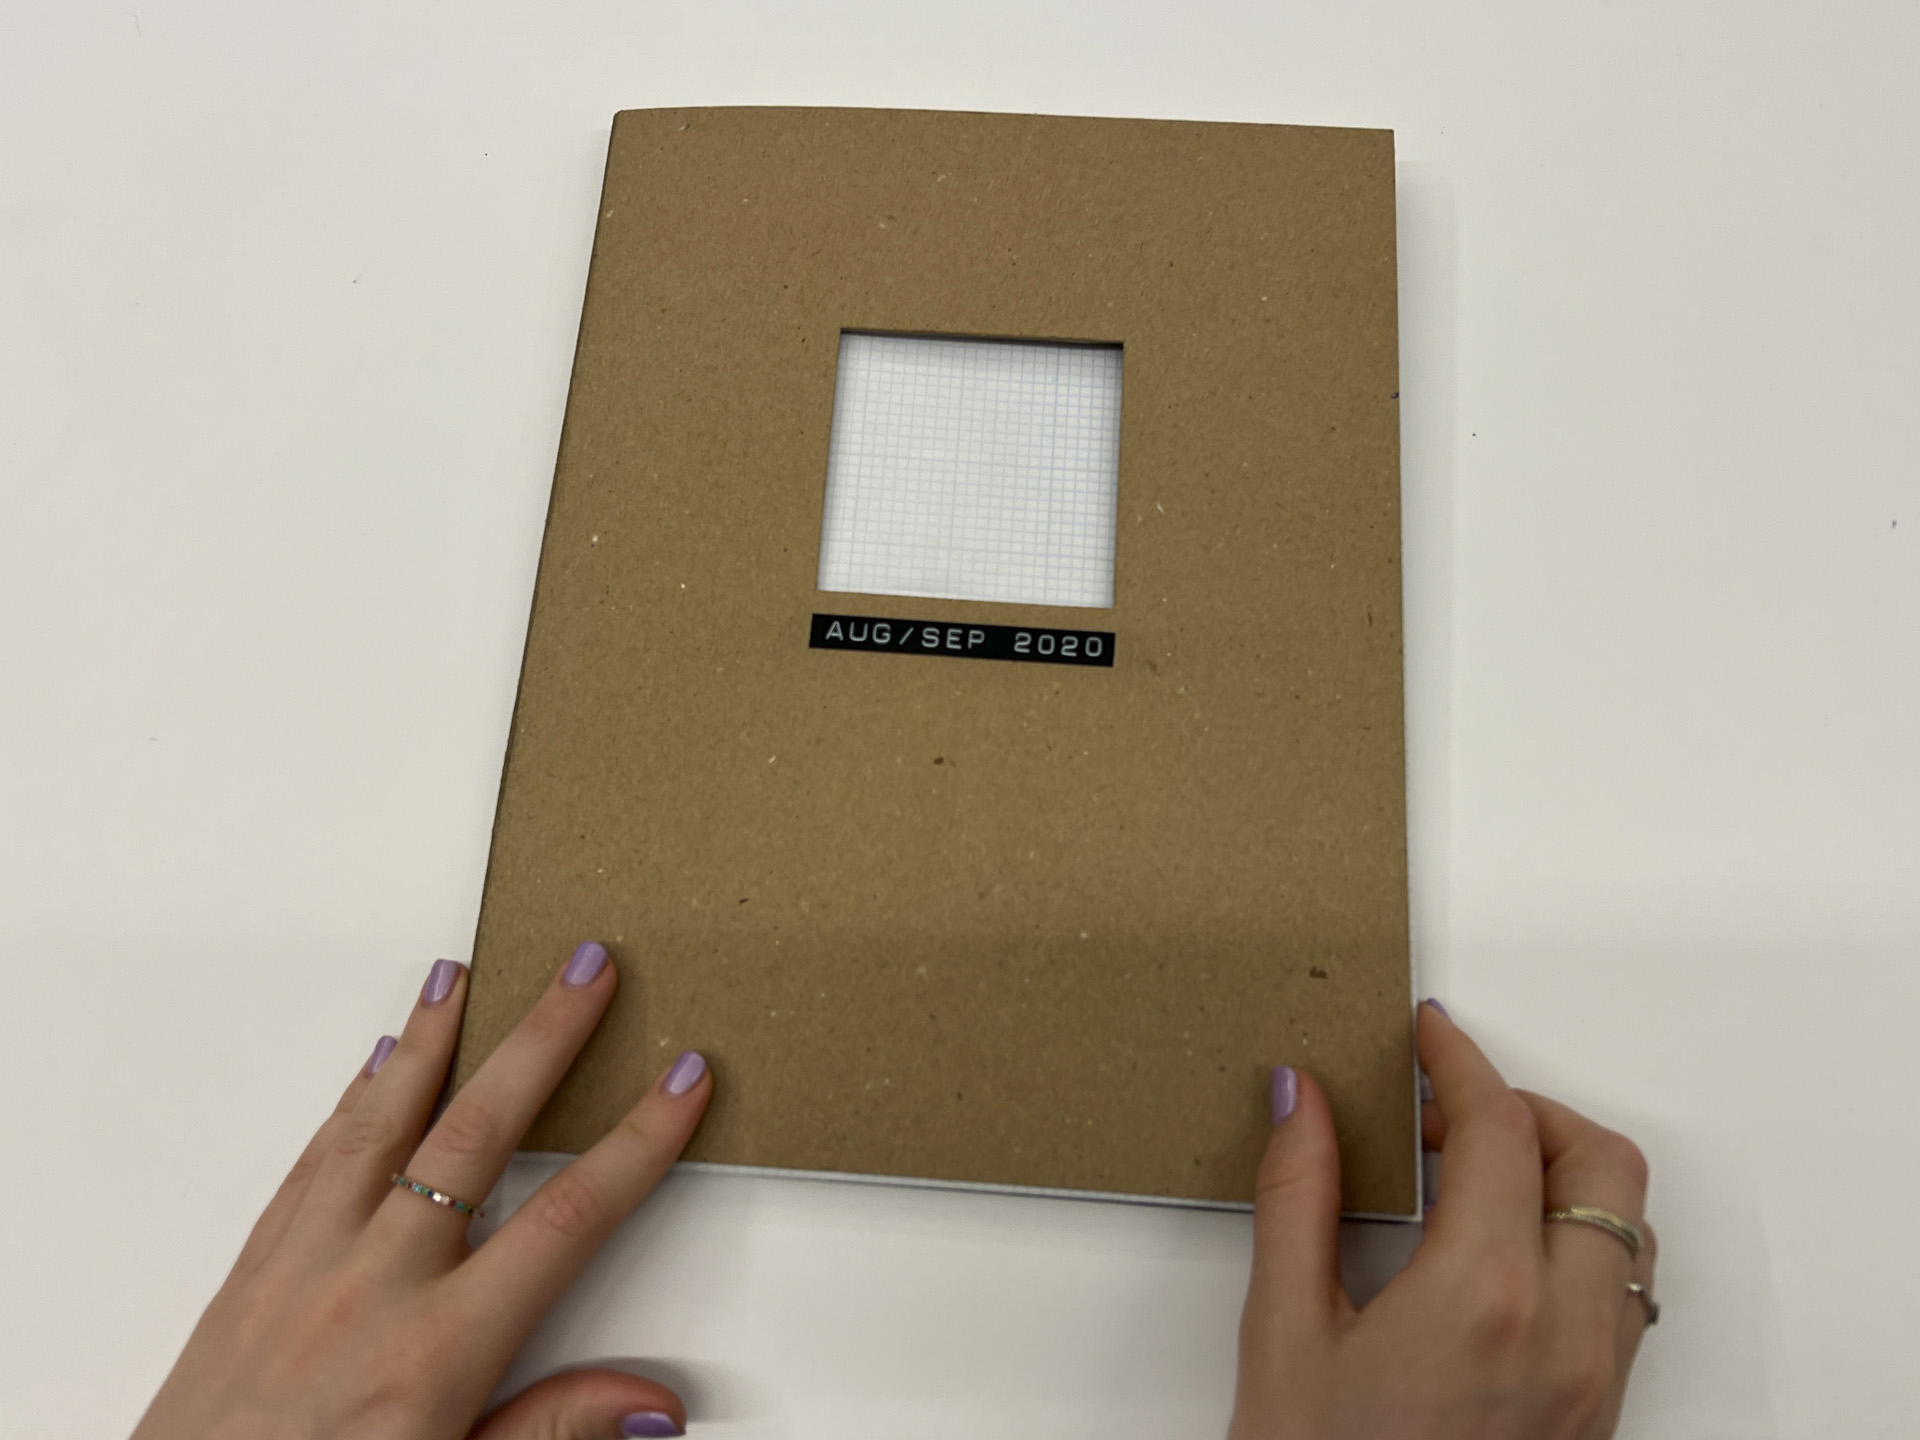 photo of a brown book cover with text "aug/sep 2020"